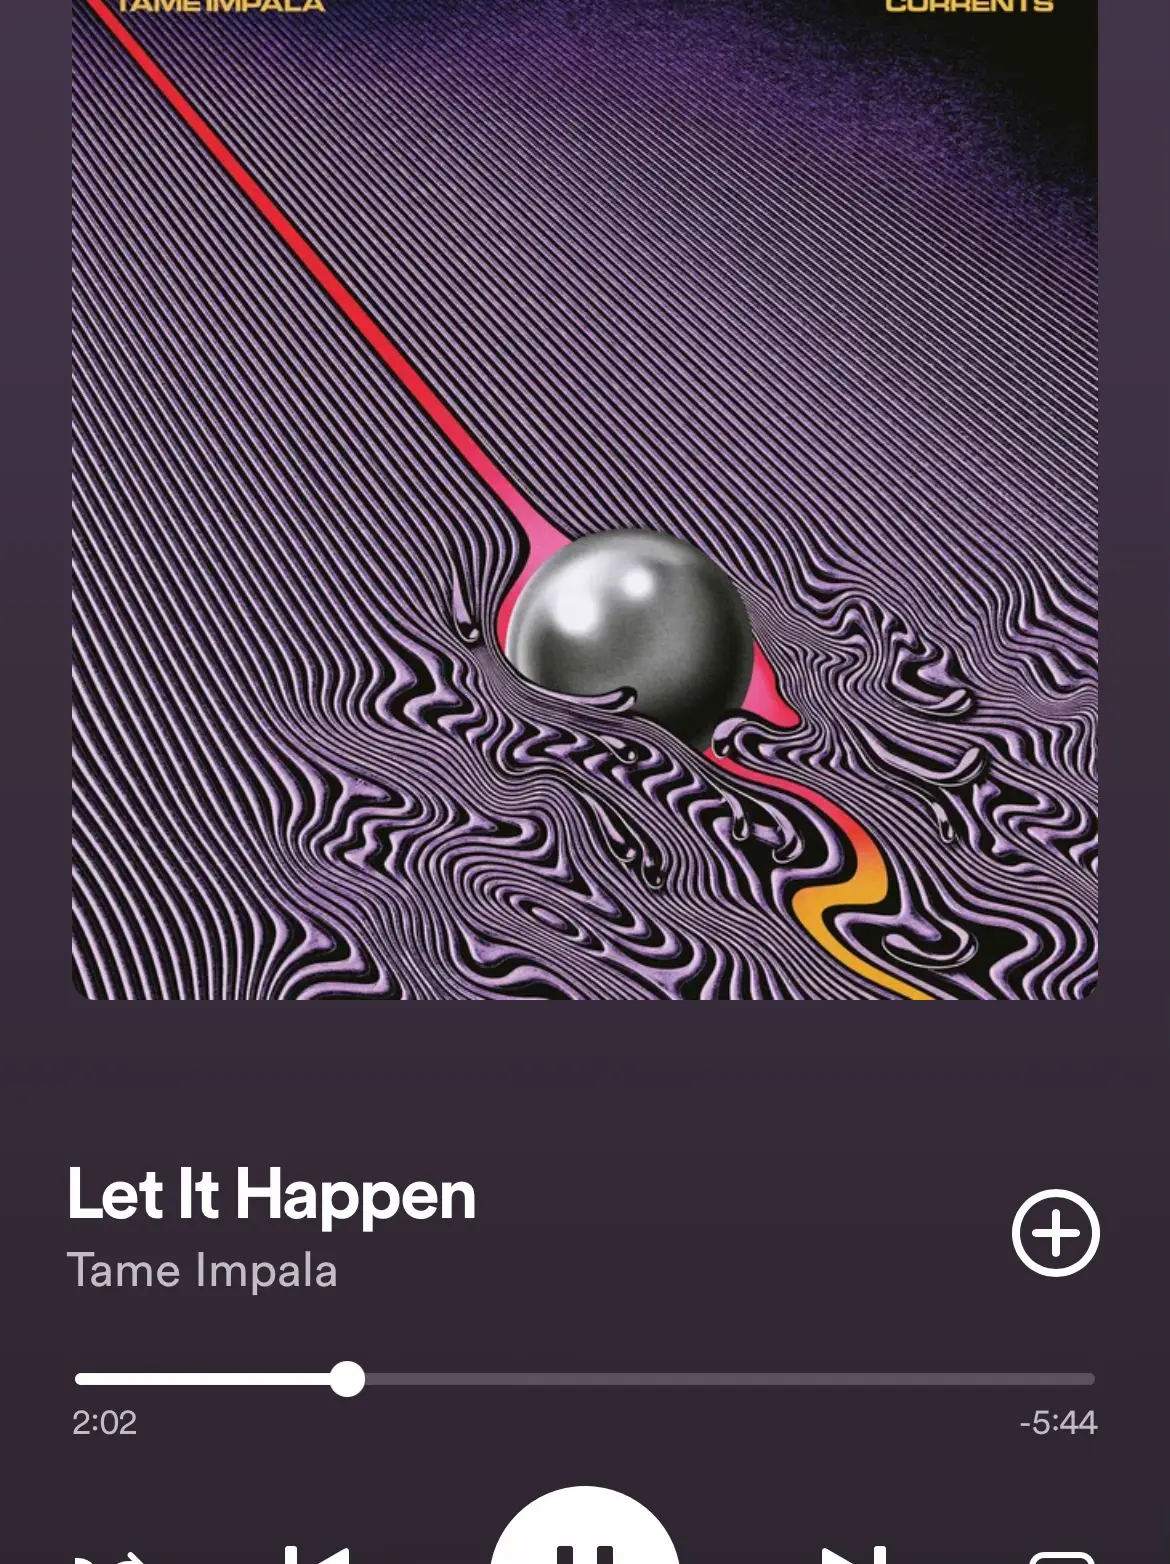  A song by Tame Impala is played on a cell phone.